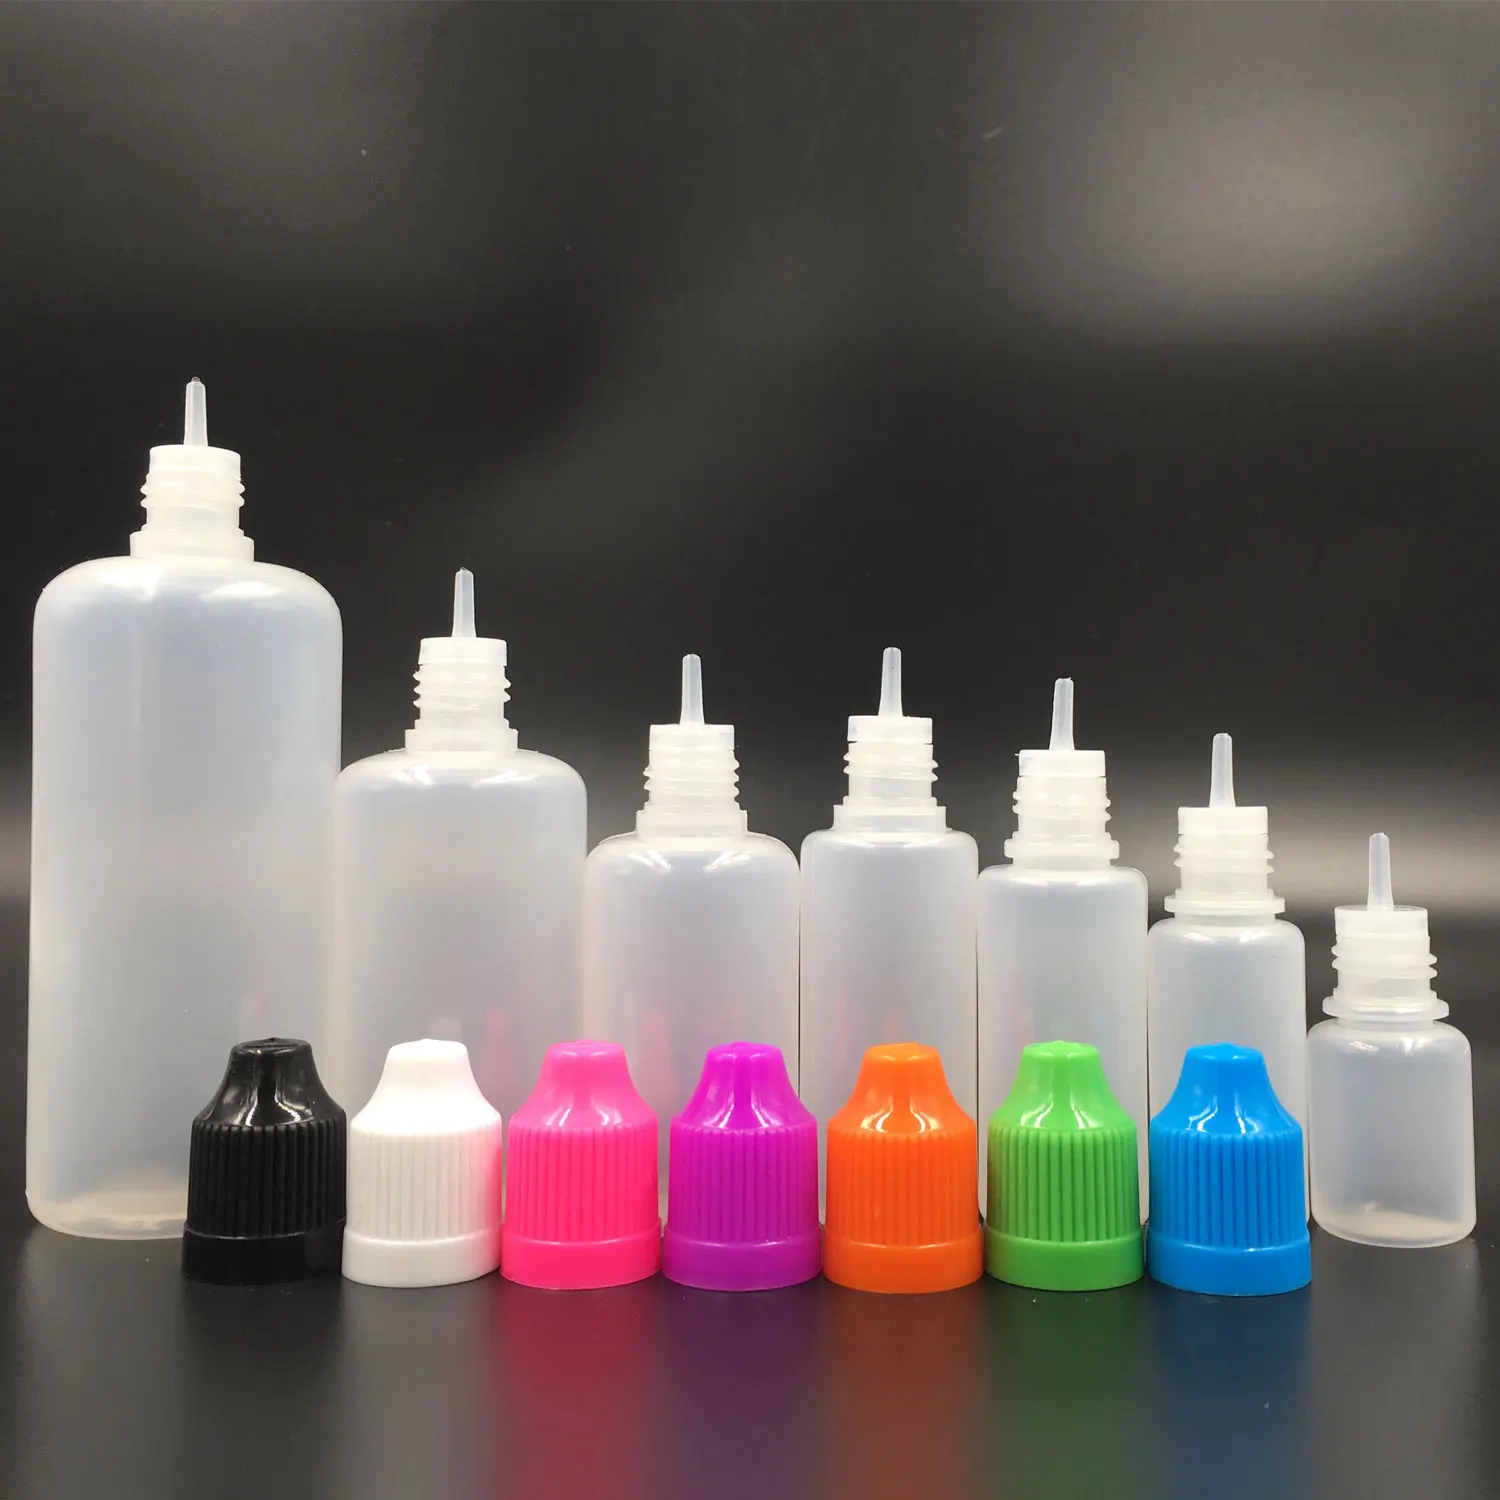 10pcs 5ml-120ml Empty Soft LDPE Dropper Bottles Plastic Containers for E Liquid Vape Bottle with Mixed Caps Lid Plugs mofii candy xr 2 4g wireless keyboard mouse combo with 100 key round keycaps mixed color keyboard 4 key ergonomic mouse green